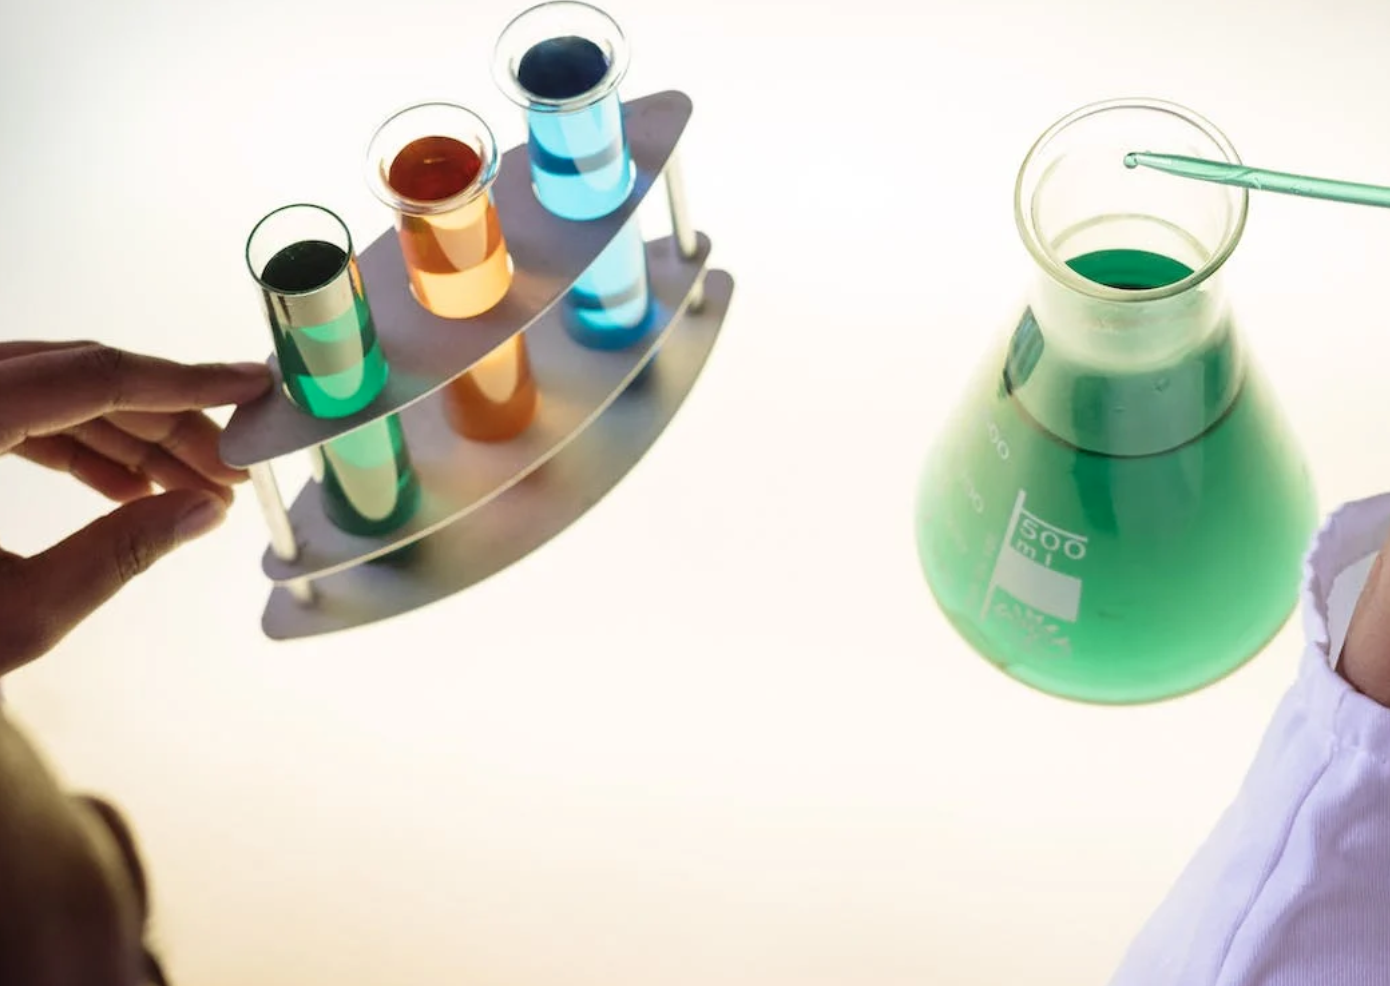 Lab technician examining interaction of chemicals; image by RF._.studio, via Pexels.com.